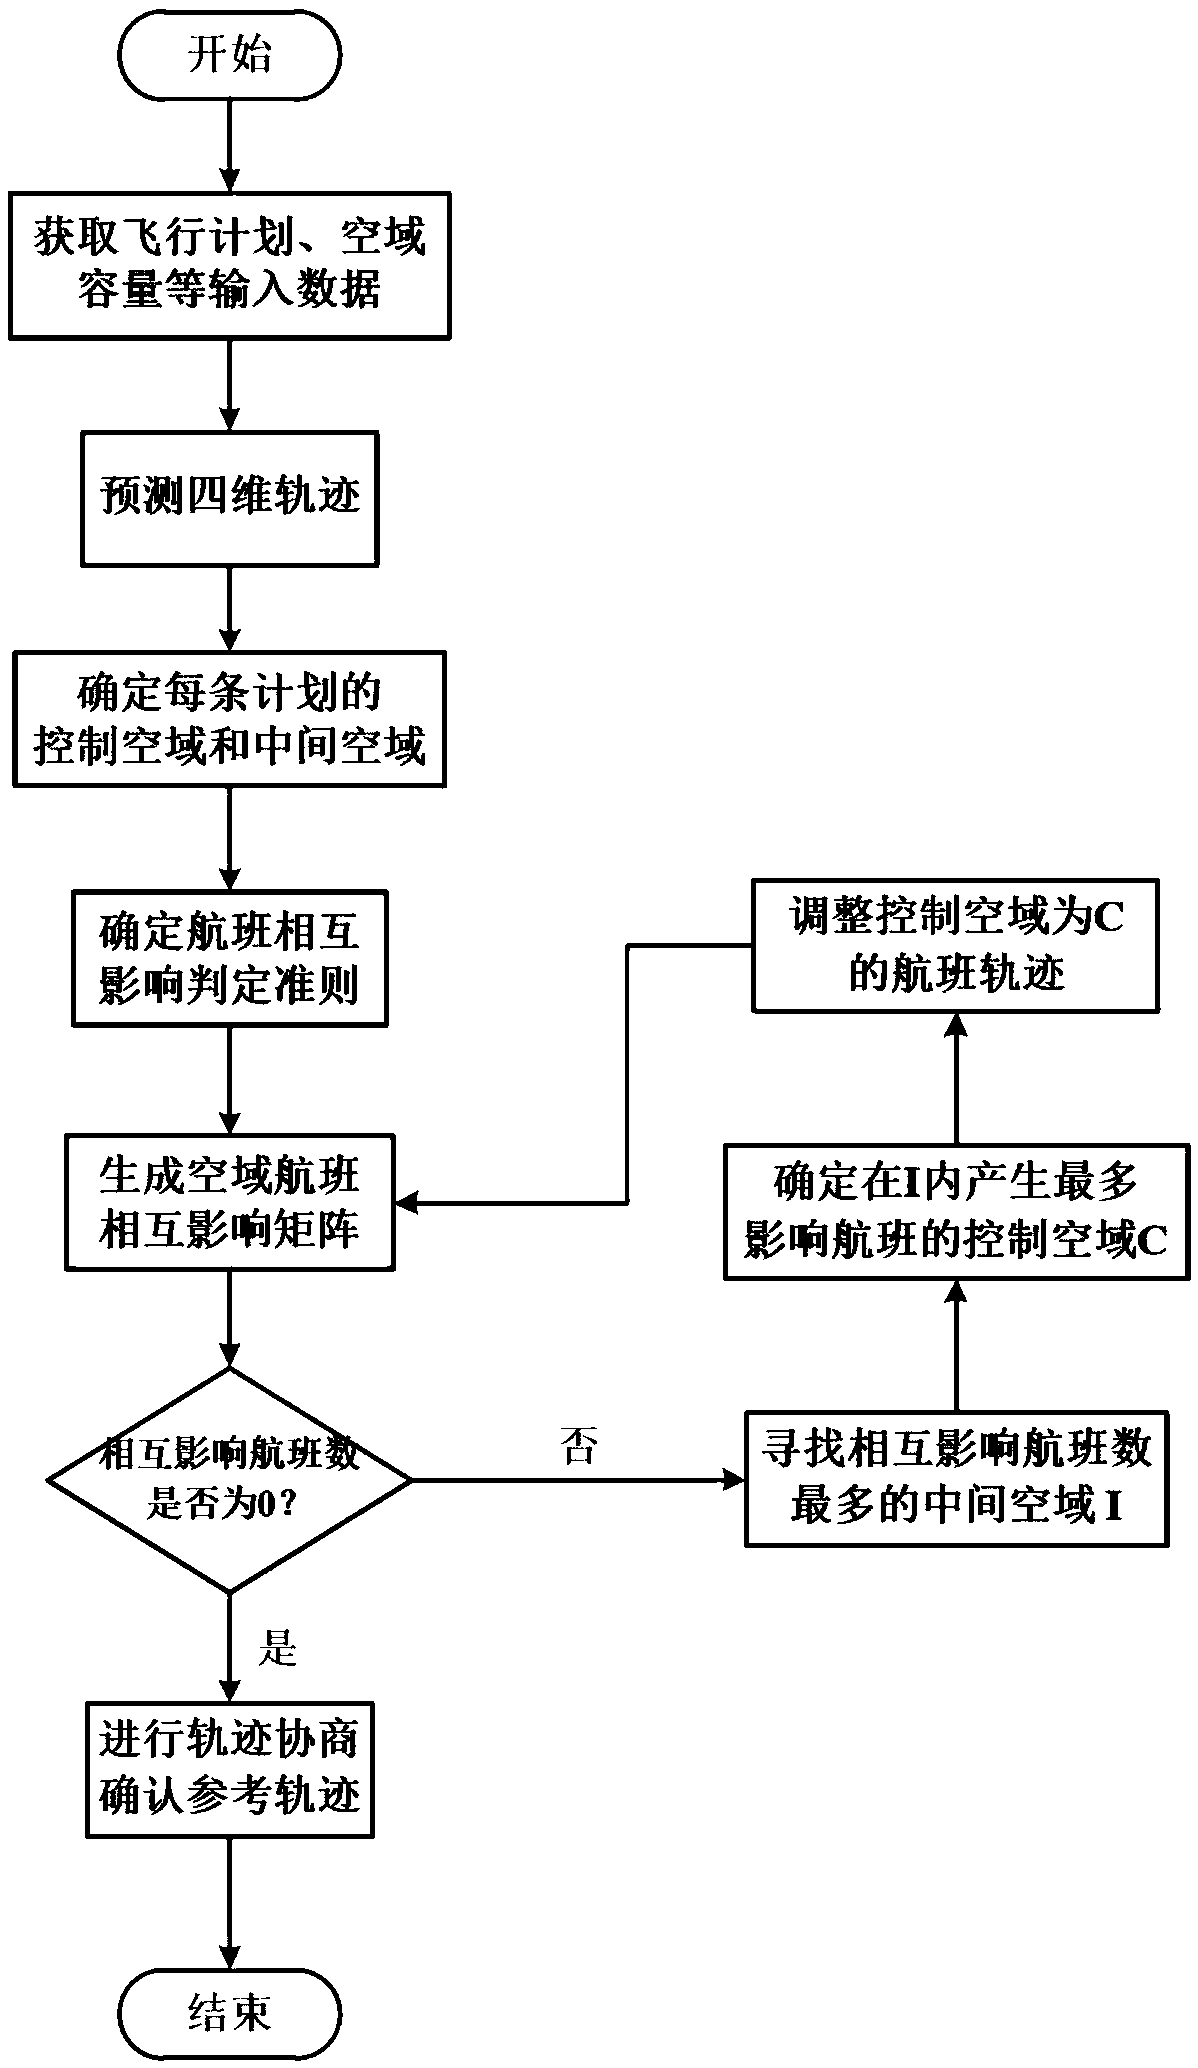 Multi-airspace trajectory planning and negotiation method oriented to four-dimensional track operation